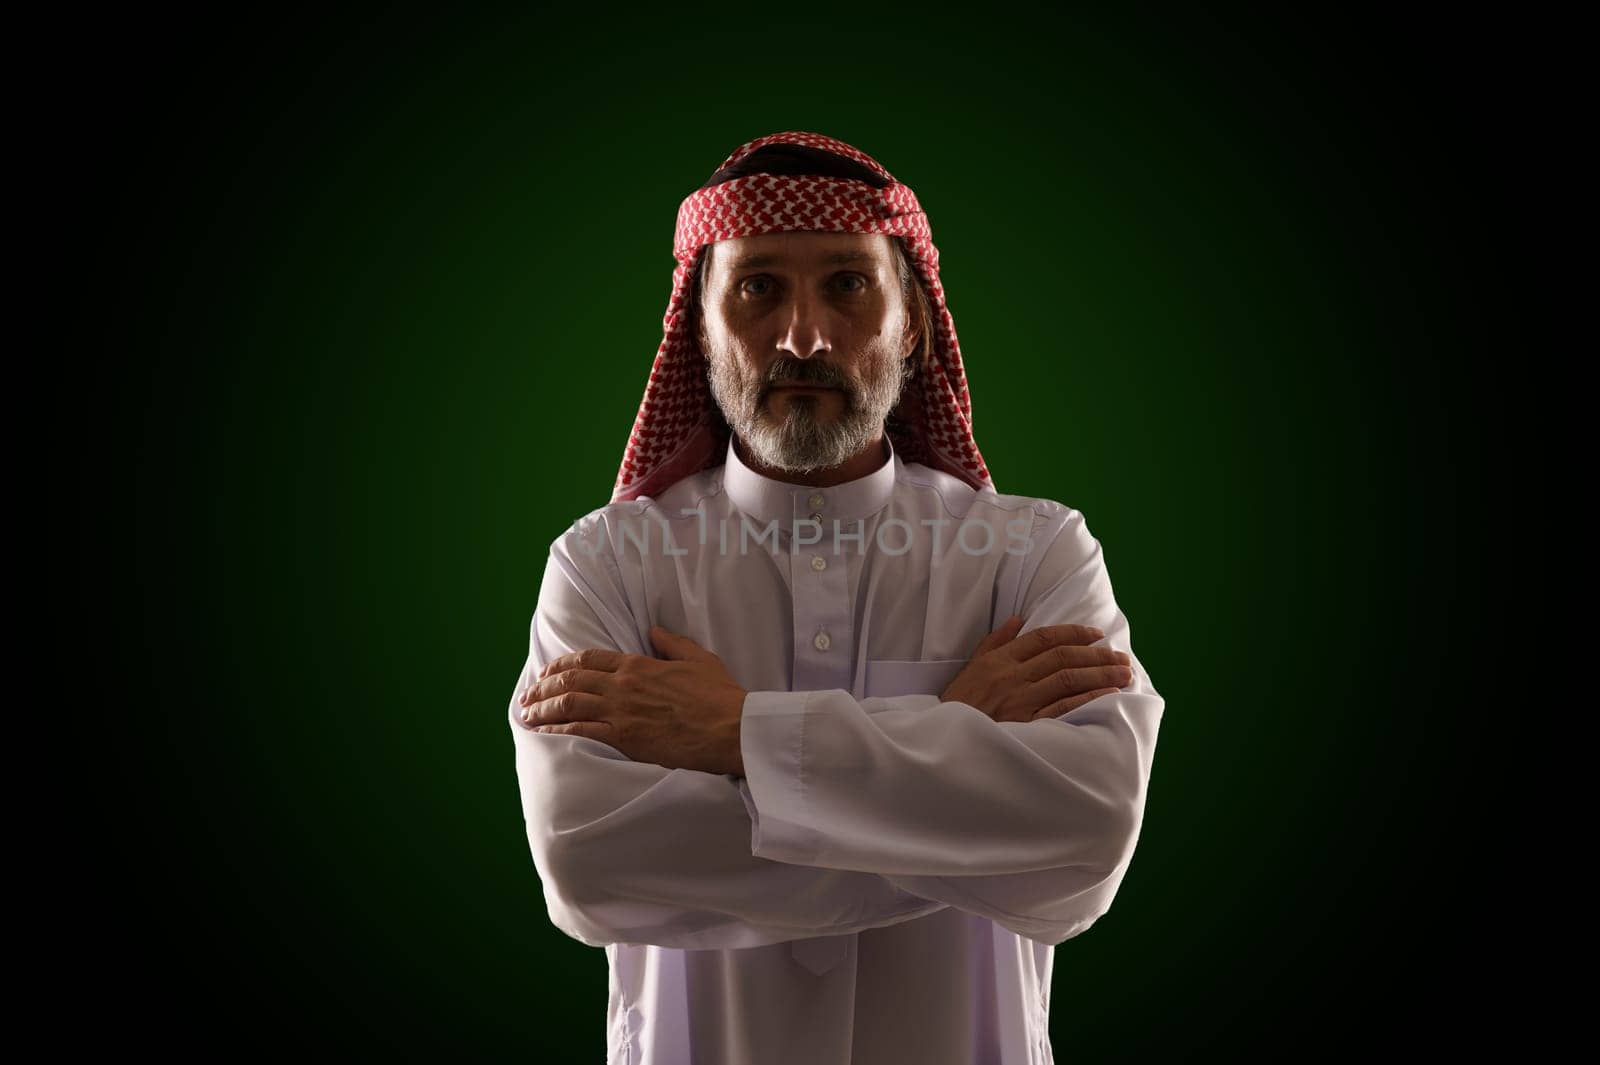 Arab man in traditional Islamic clothing and immersed in Sharia culture, with emphasis on religious customs, architecture, and lifestyle. Essence of Middle Eastern heritage, history, and spirituality. High quality photo